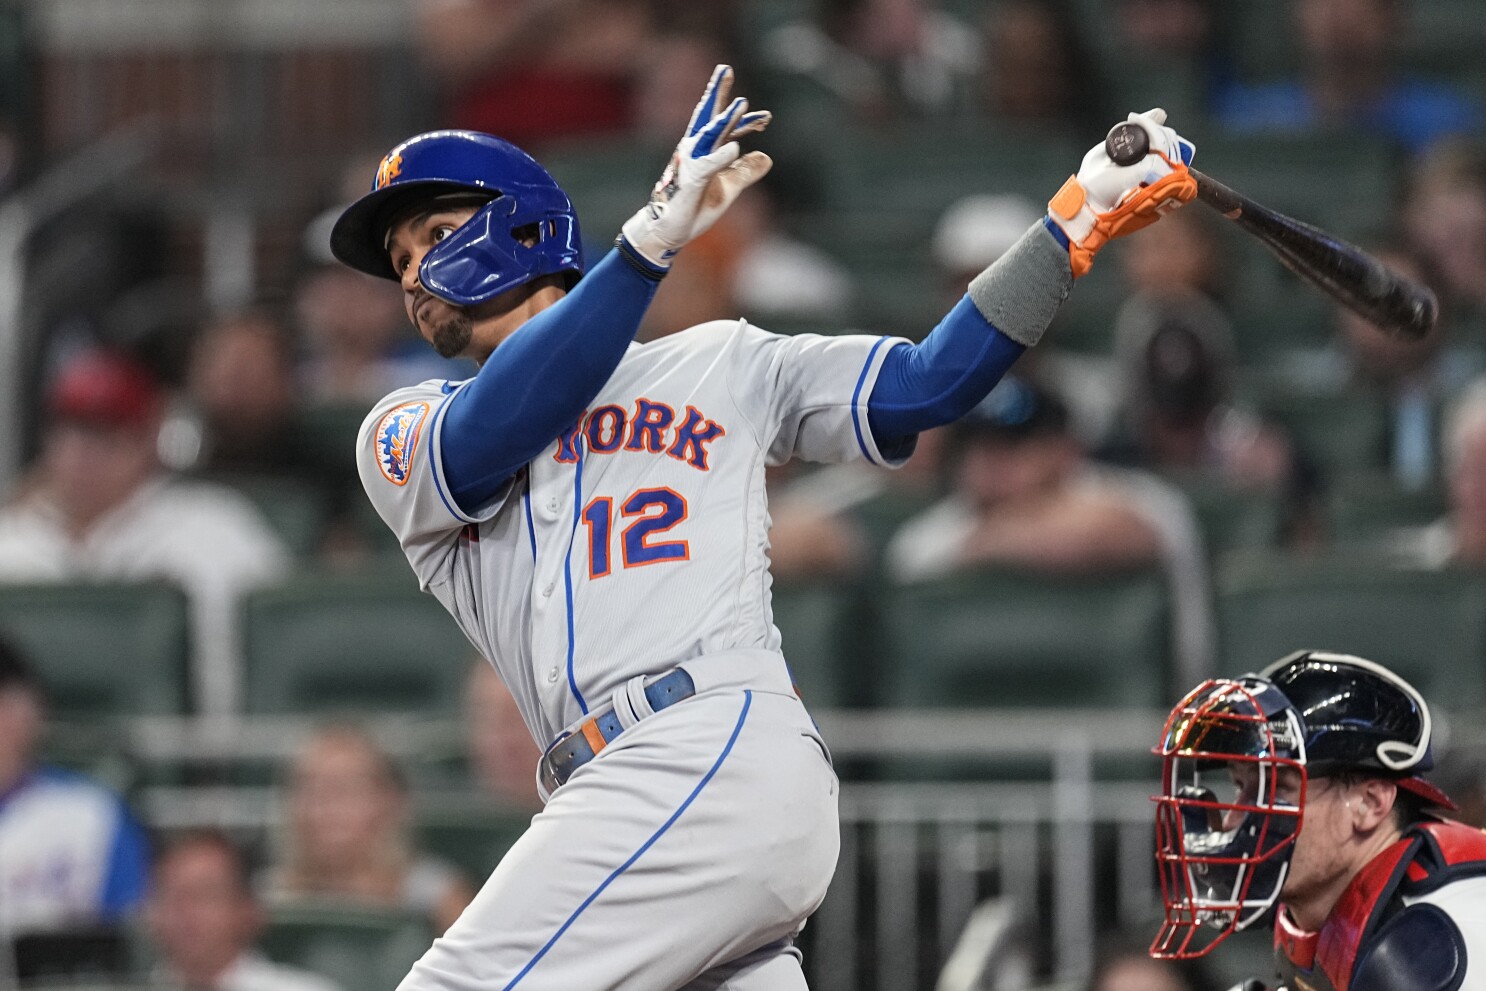 Mets rookies look to finish strong, build on MLB experience